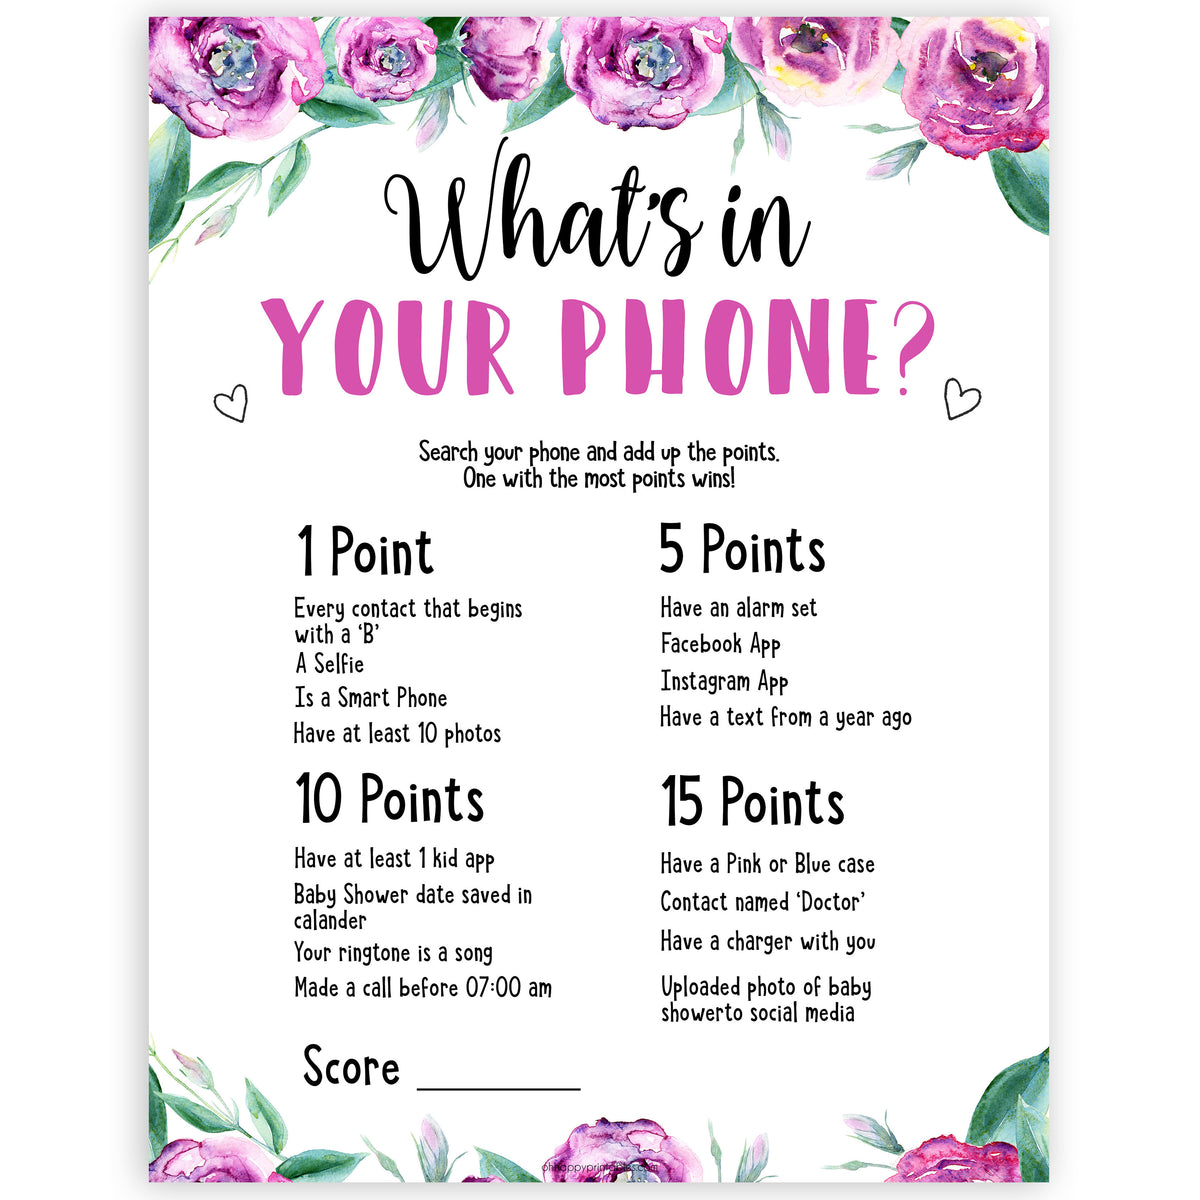 Purple peonies whats in your phone baby shower games, printable baby shower games, fun baby shower games, baby shower games, popular baby shower games, floral baby shower games, purple baby shower themes